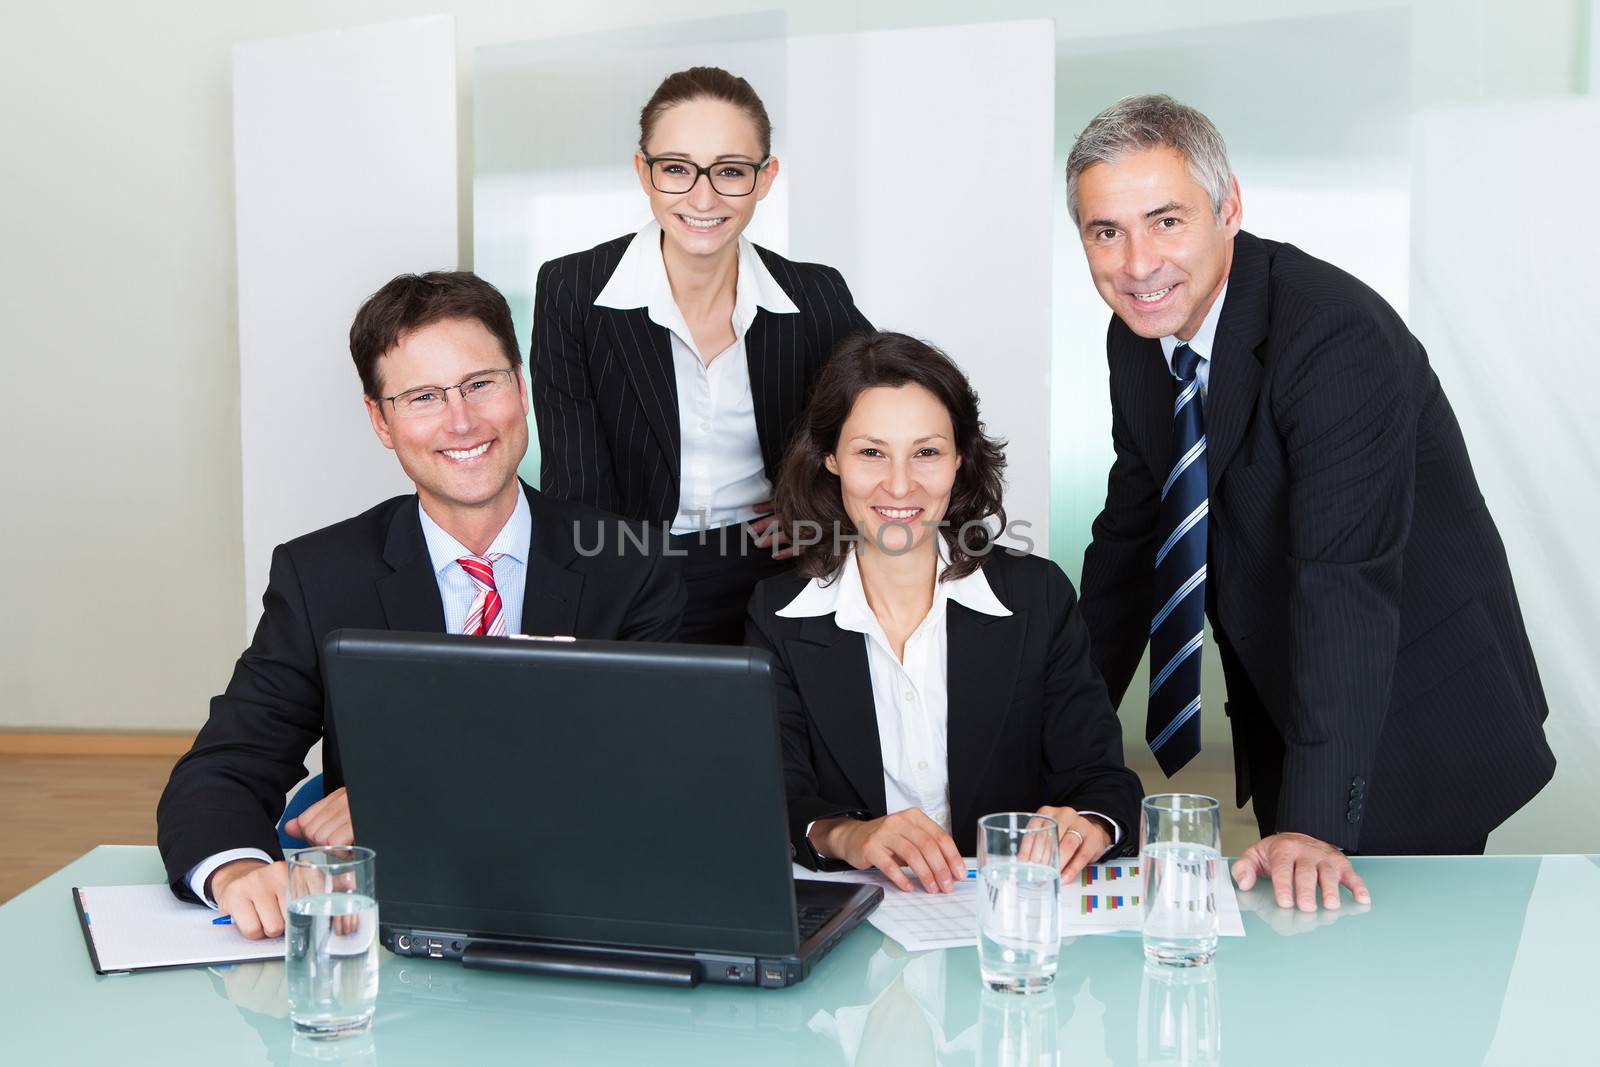 Confident successful business team of diverse executives posing in an office together smiling happily at the camera